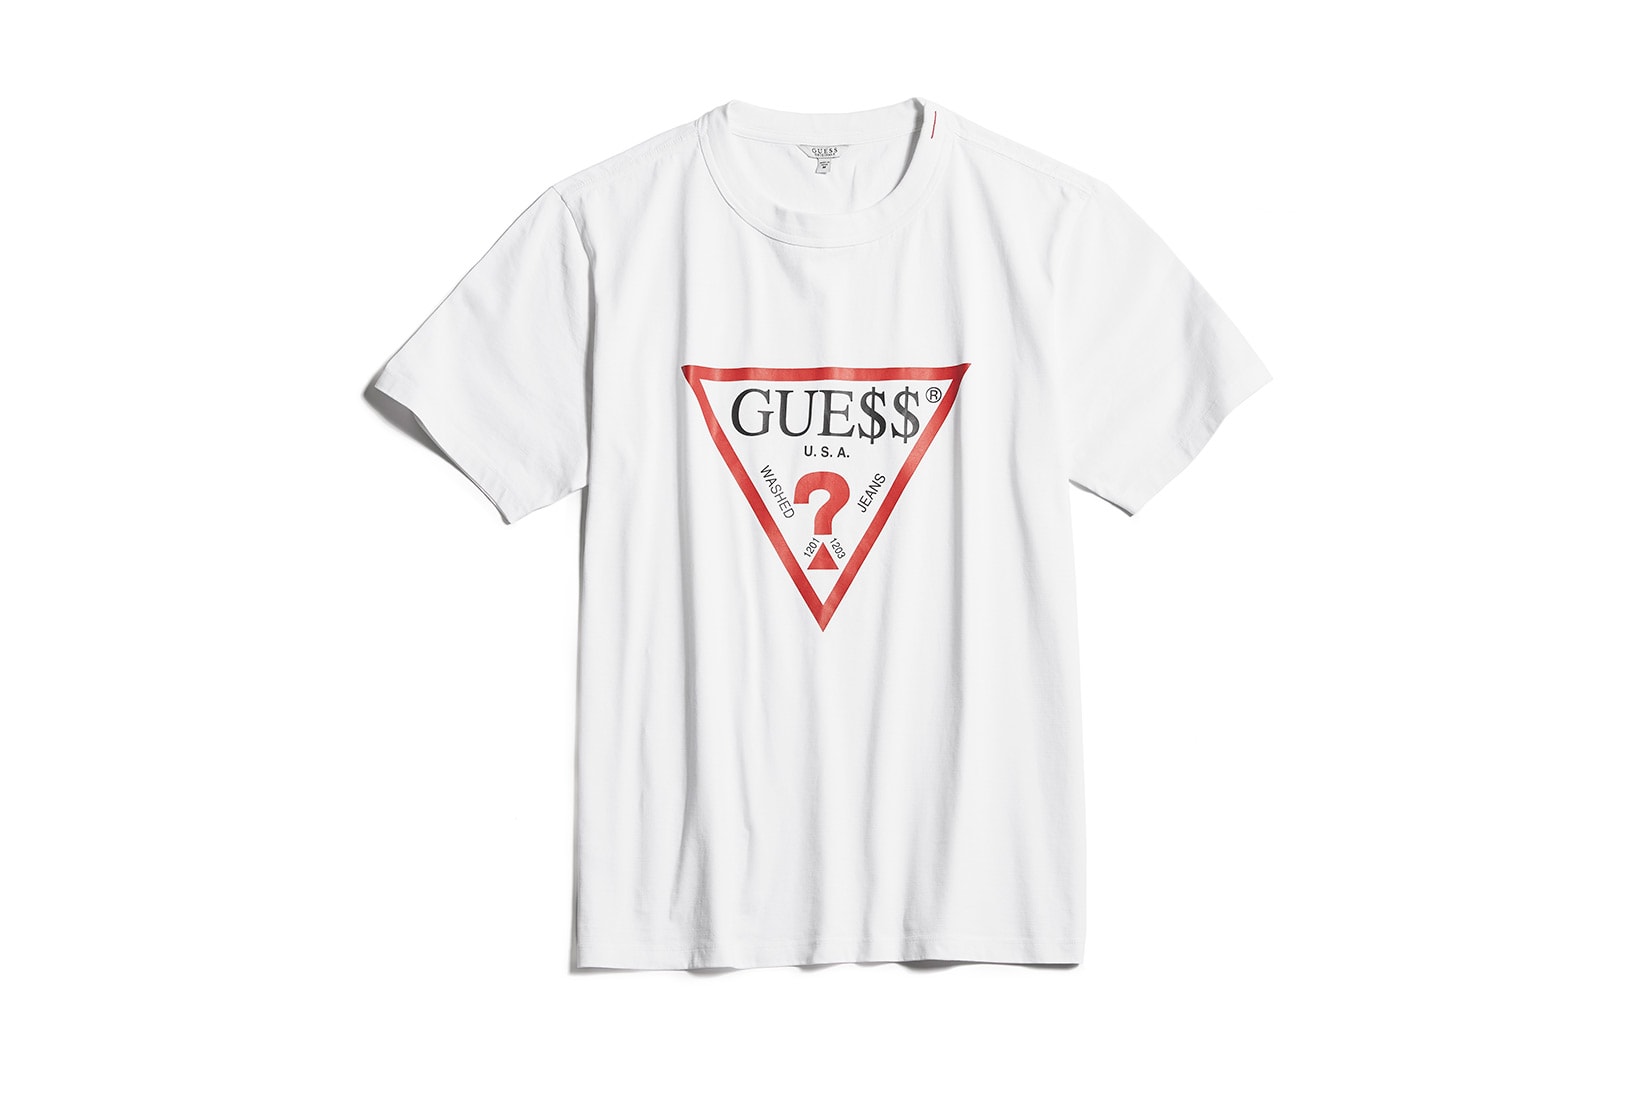 ASAP Rocky Guess Originals Ice Cream and Cotton Candy